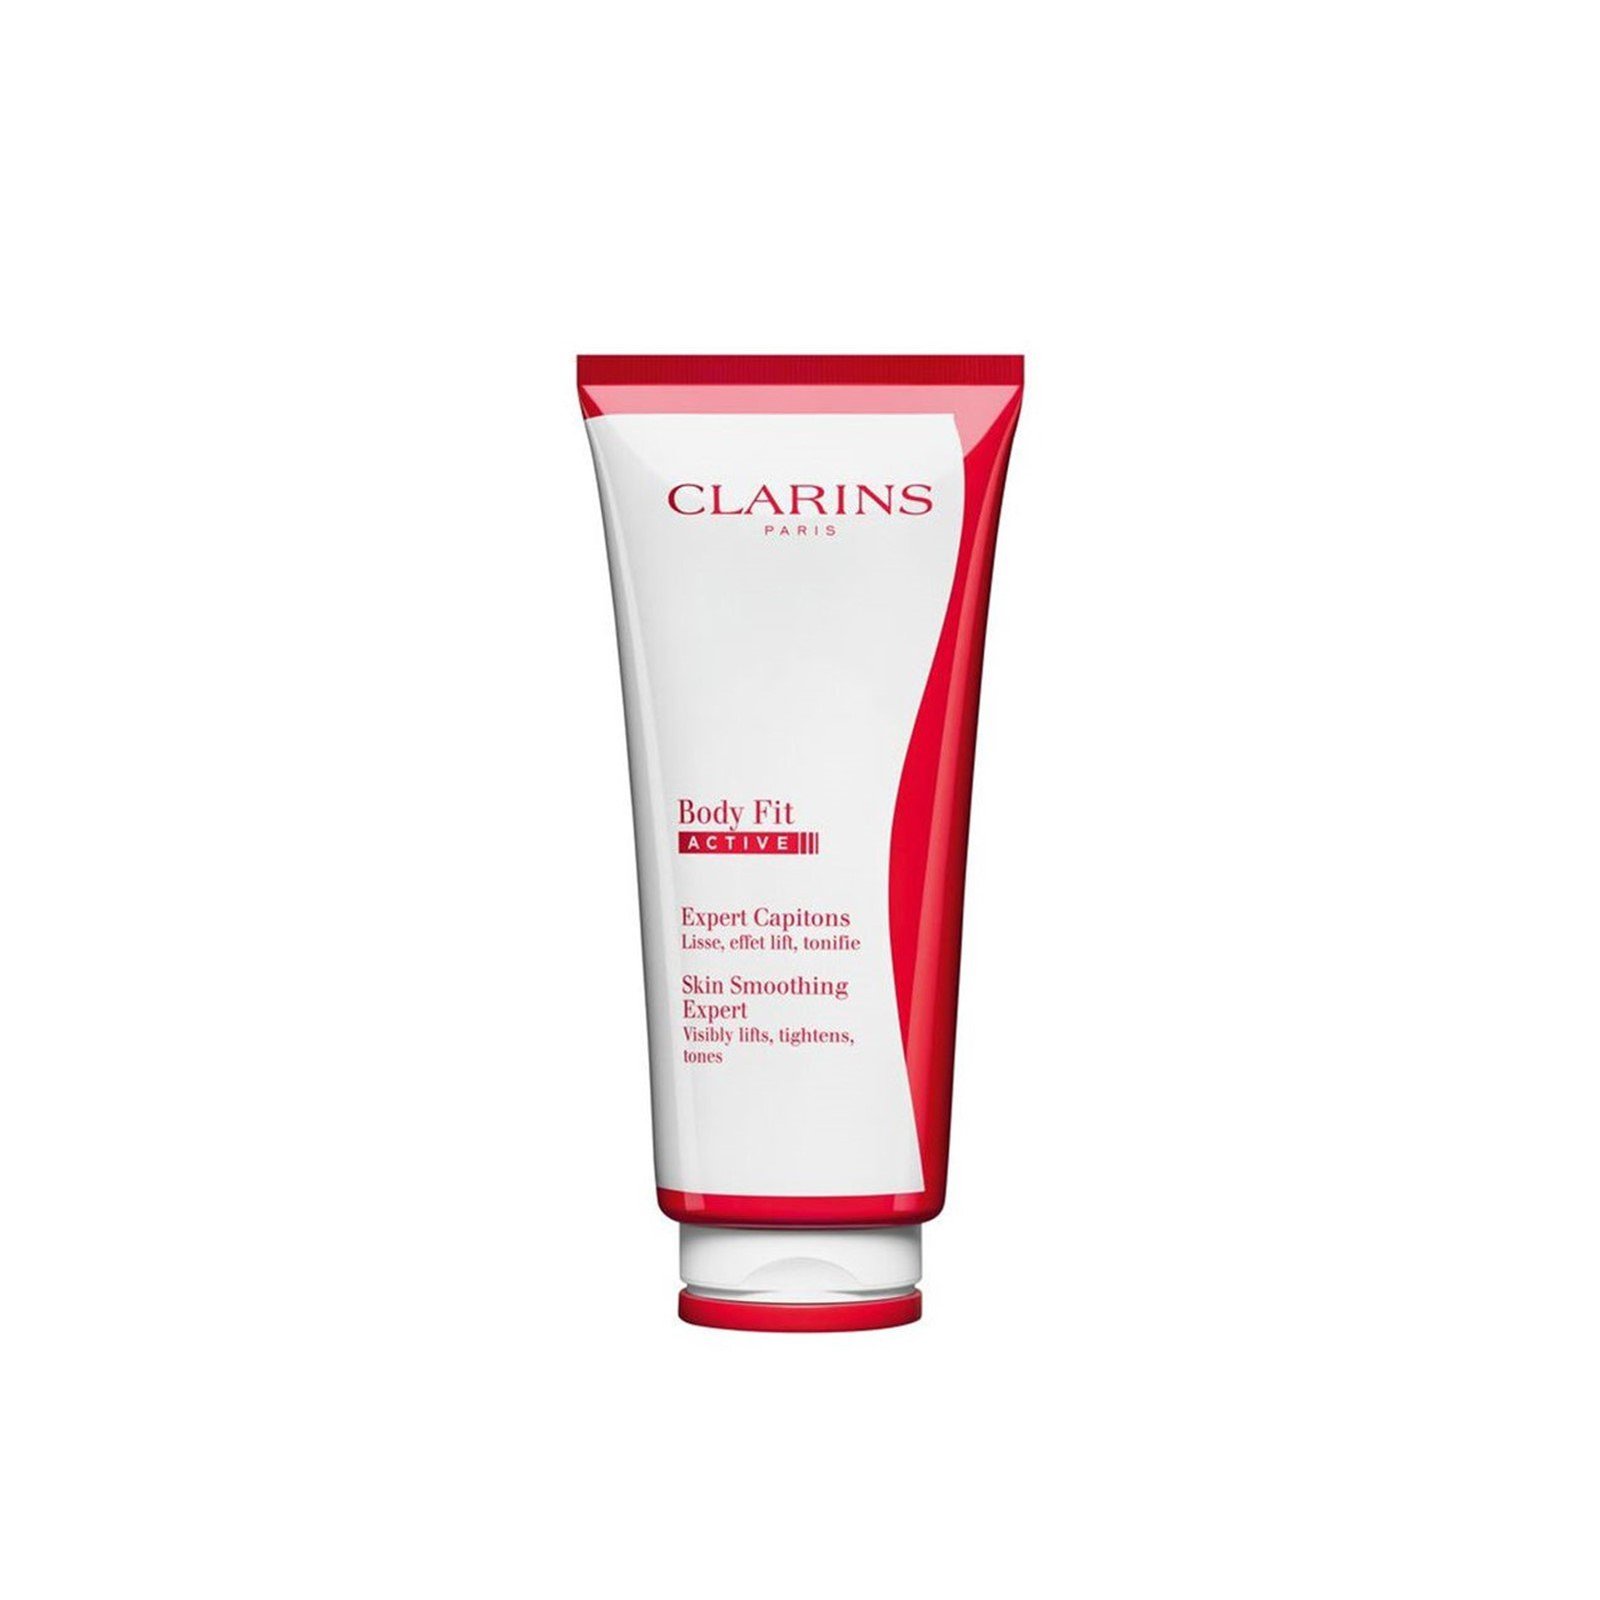 Clarins Body Fit Active Skin Smoothing Expert 200ml (6.7oz)